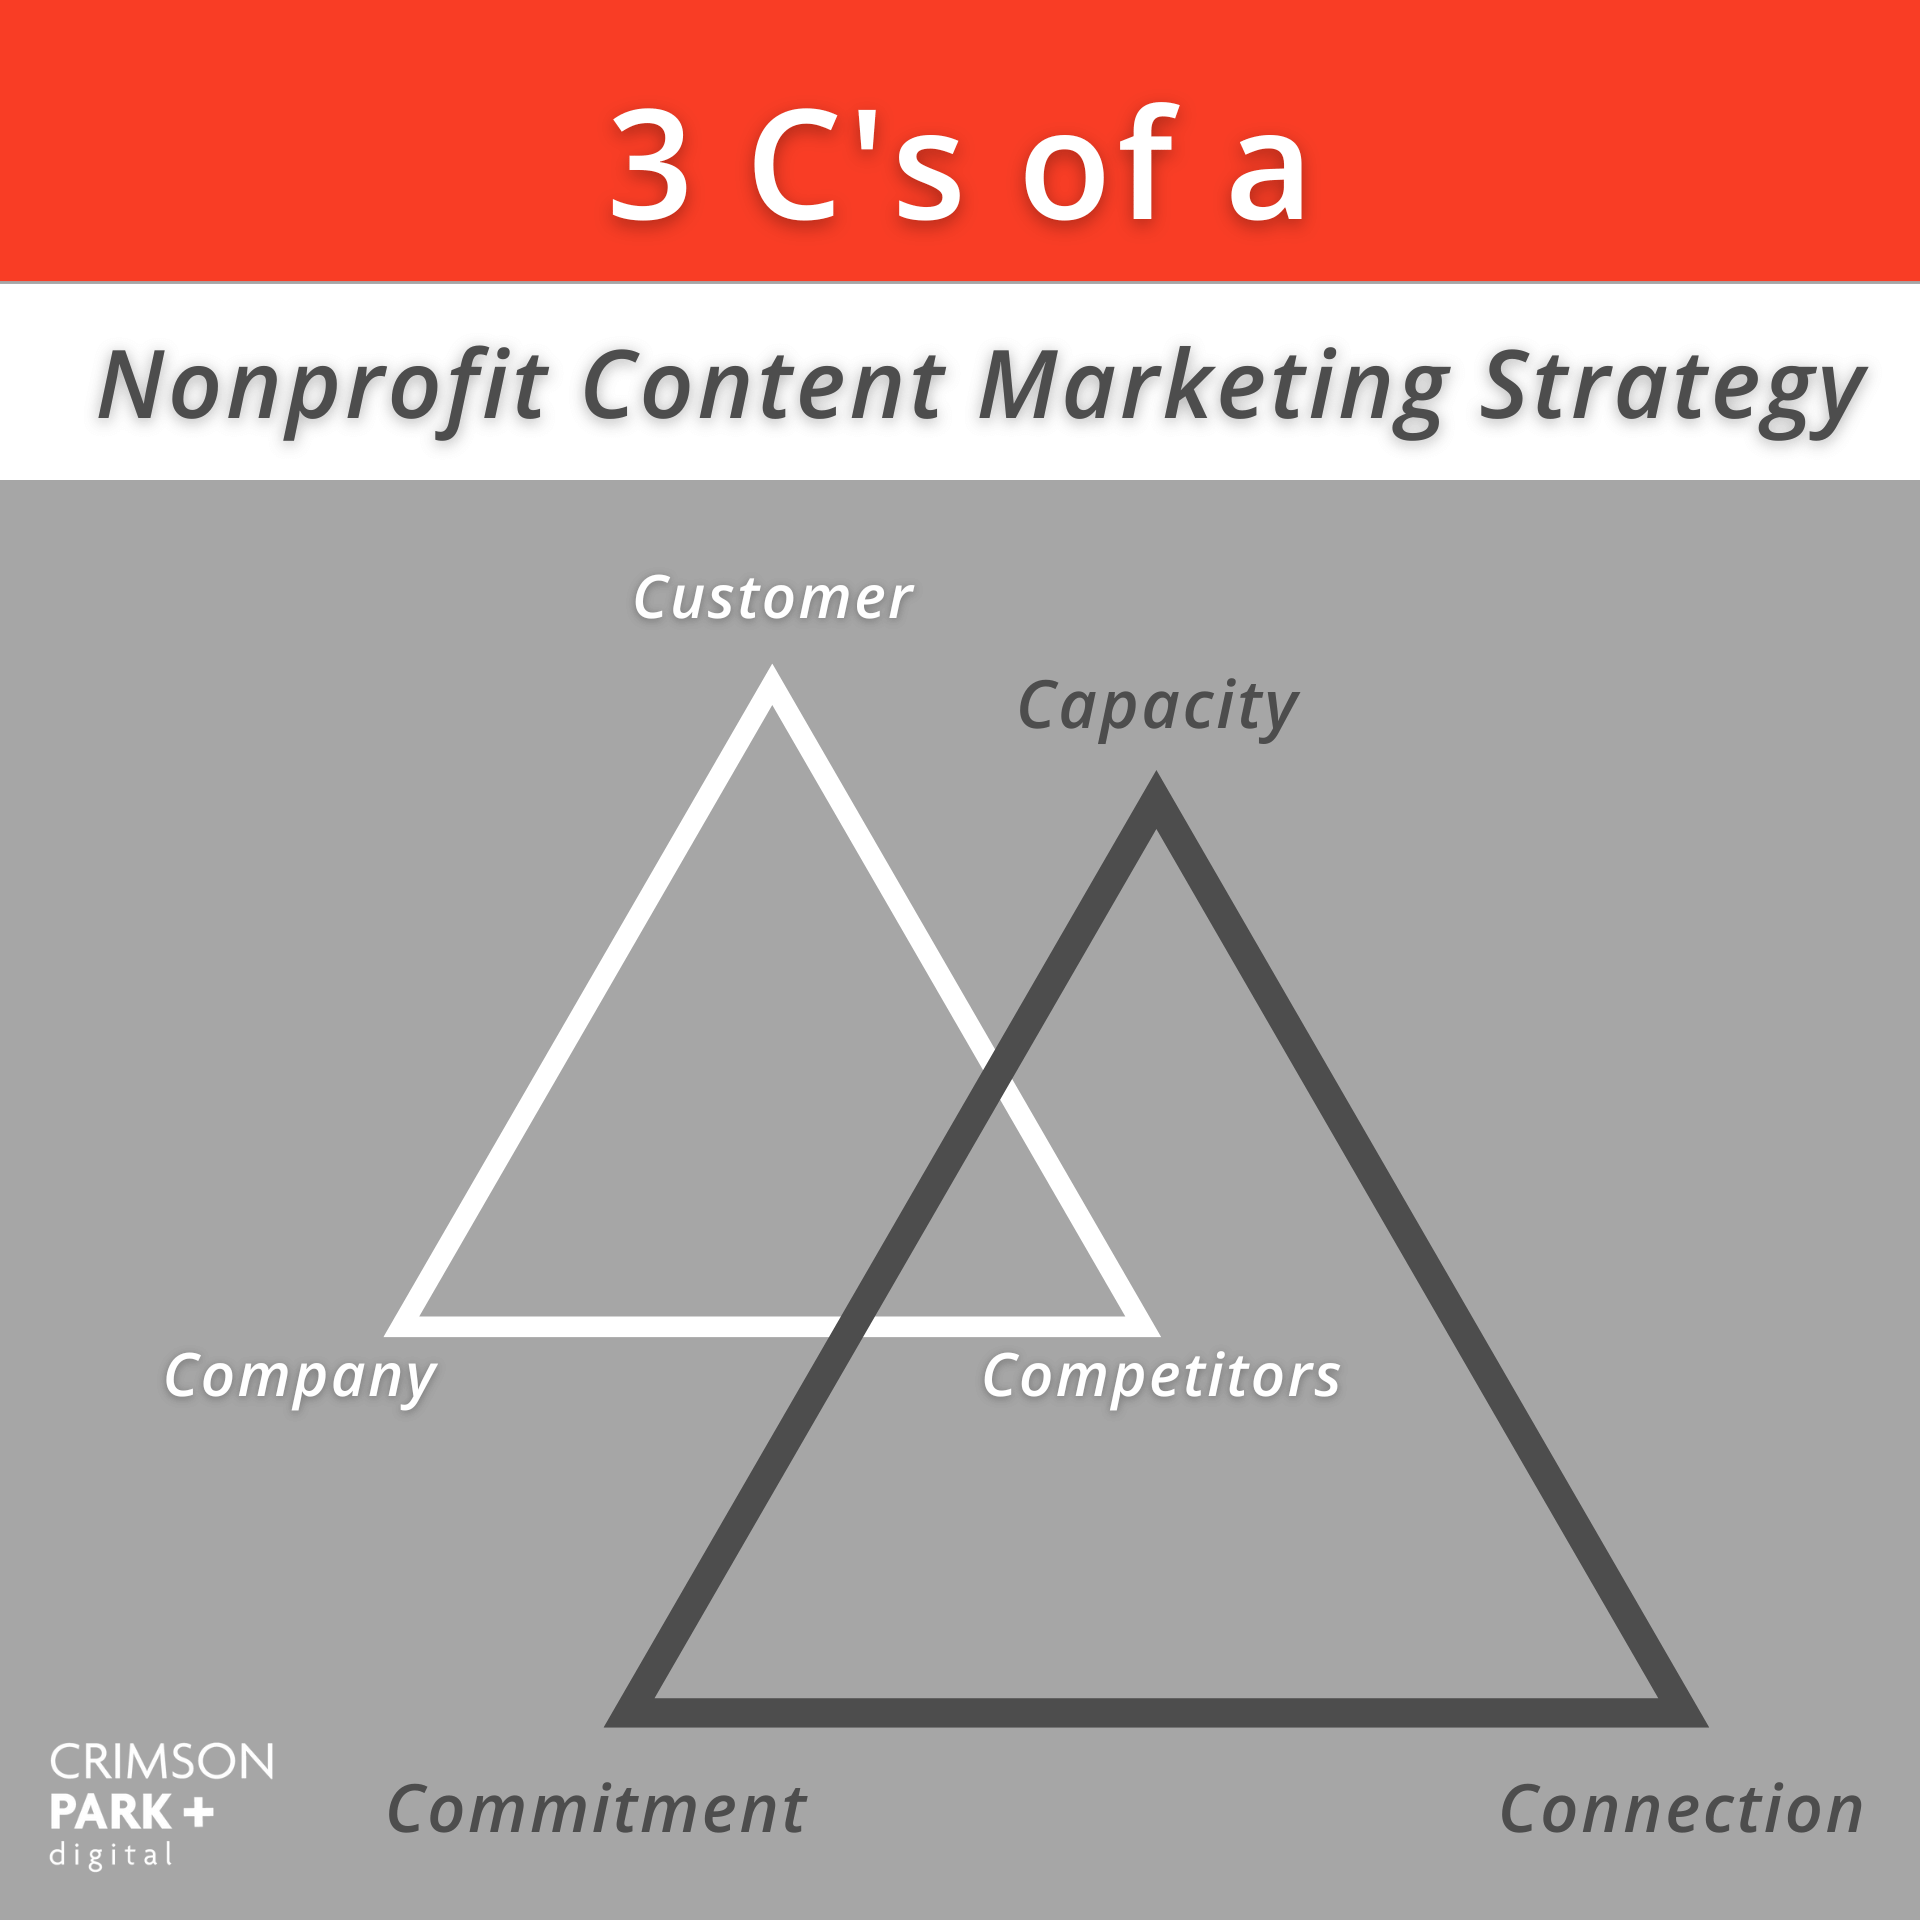 The 3 C's of a nonprofit content marketing strategy